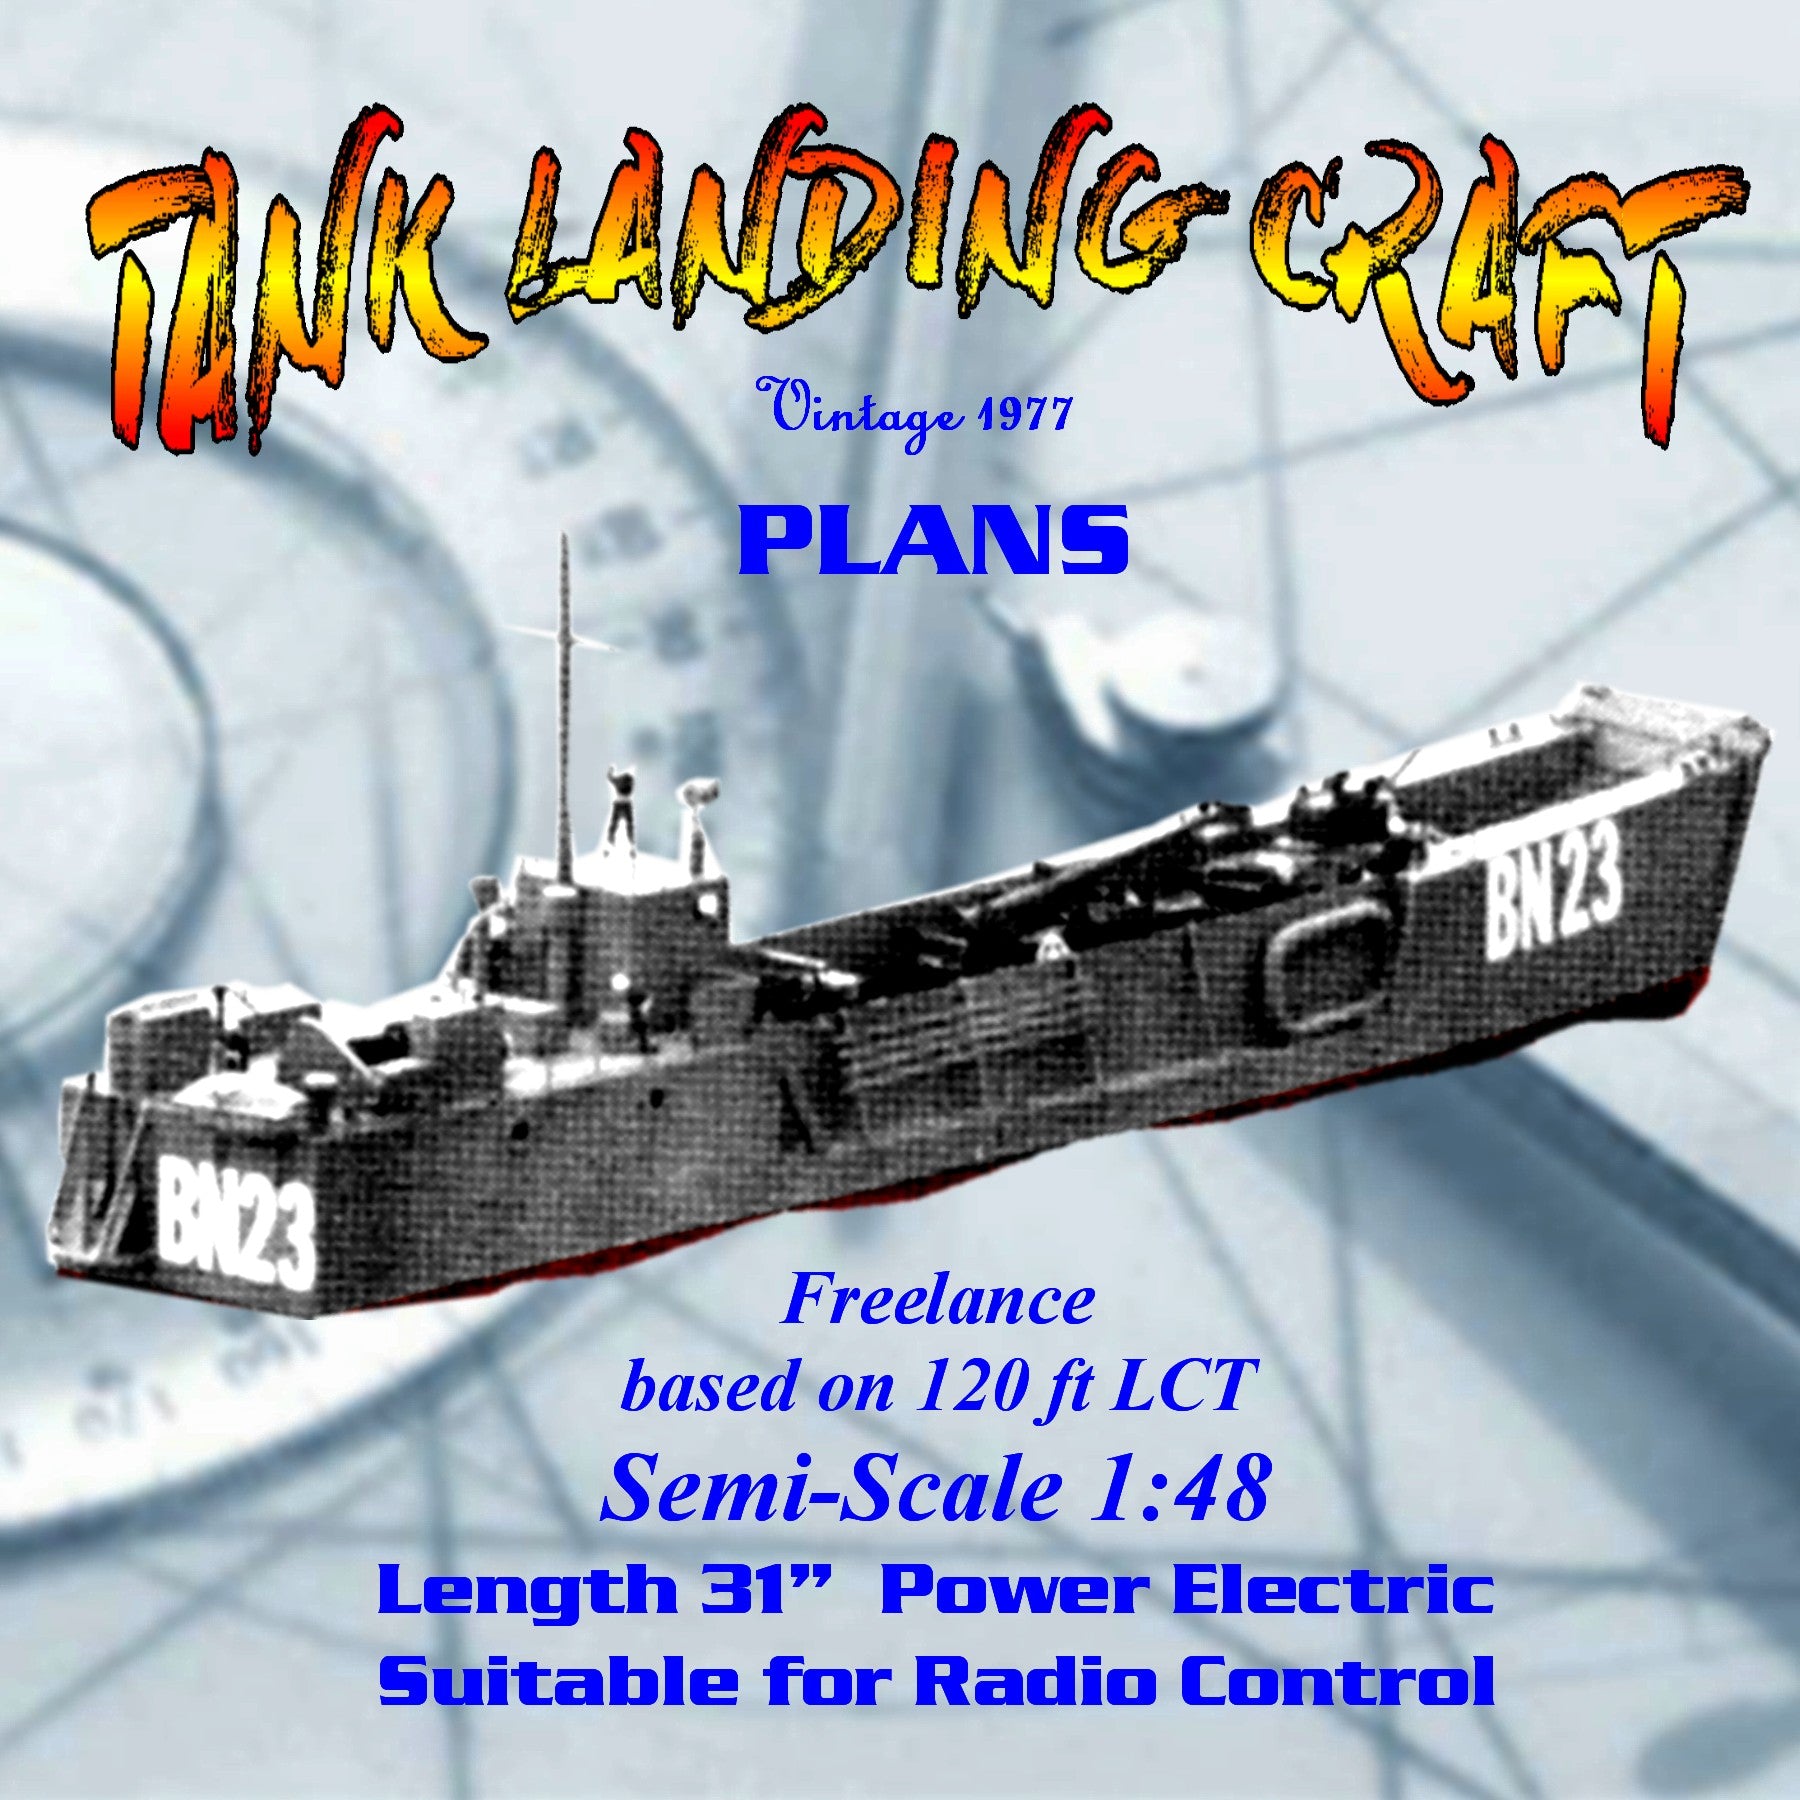 full size printed plan semi scale 1/48 31" tank landing craft suitable for radio control